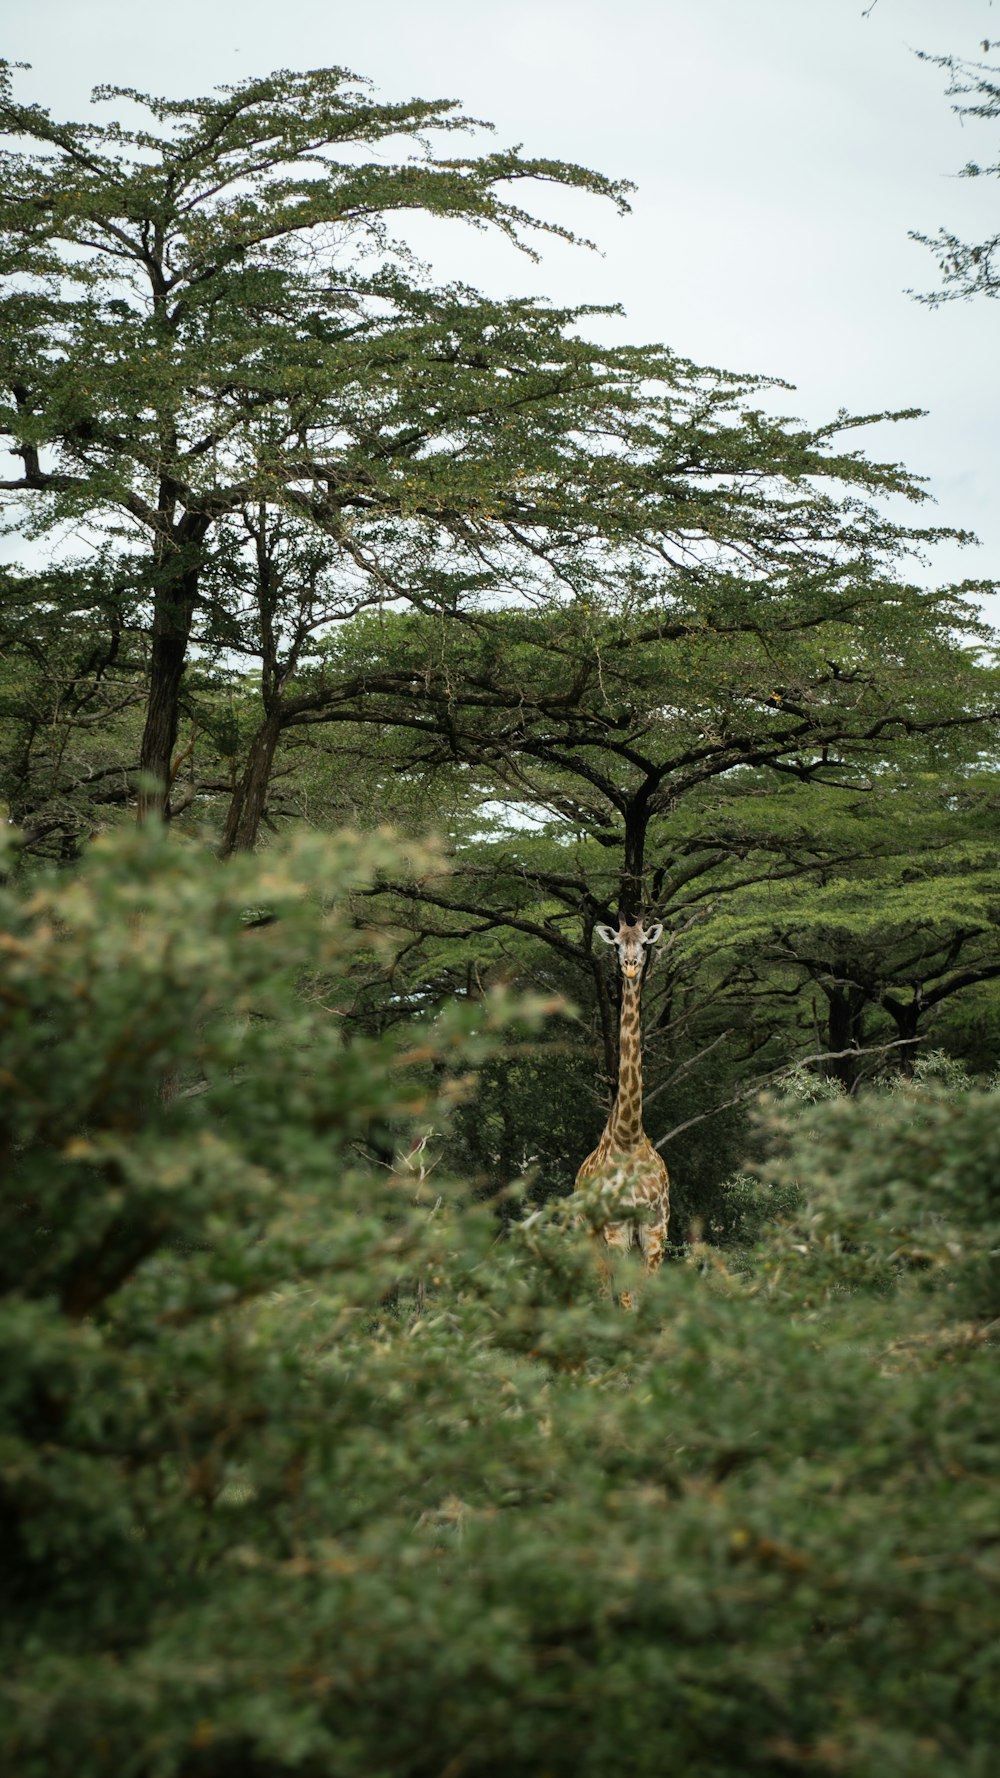 a giraffe standing in the middle of a forest